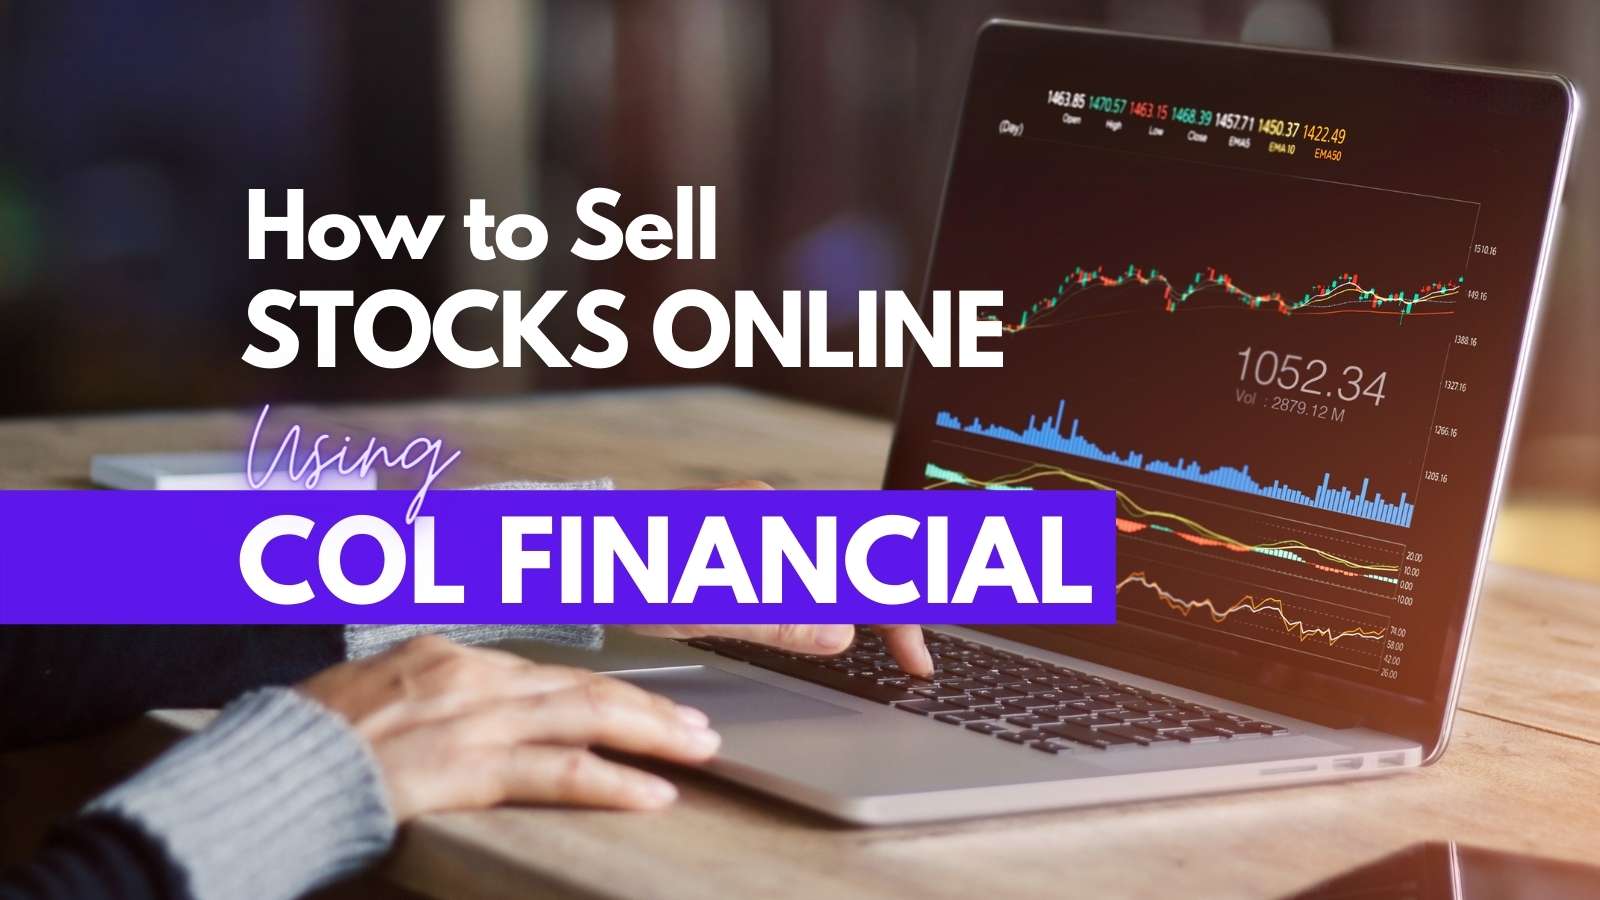 how to sell stocks online using col financial updated guide